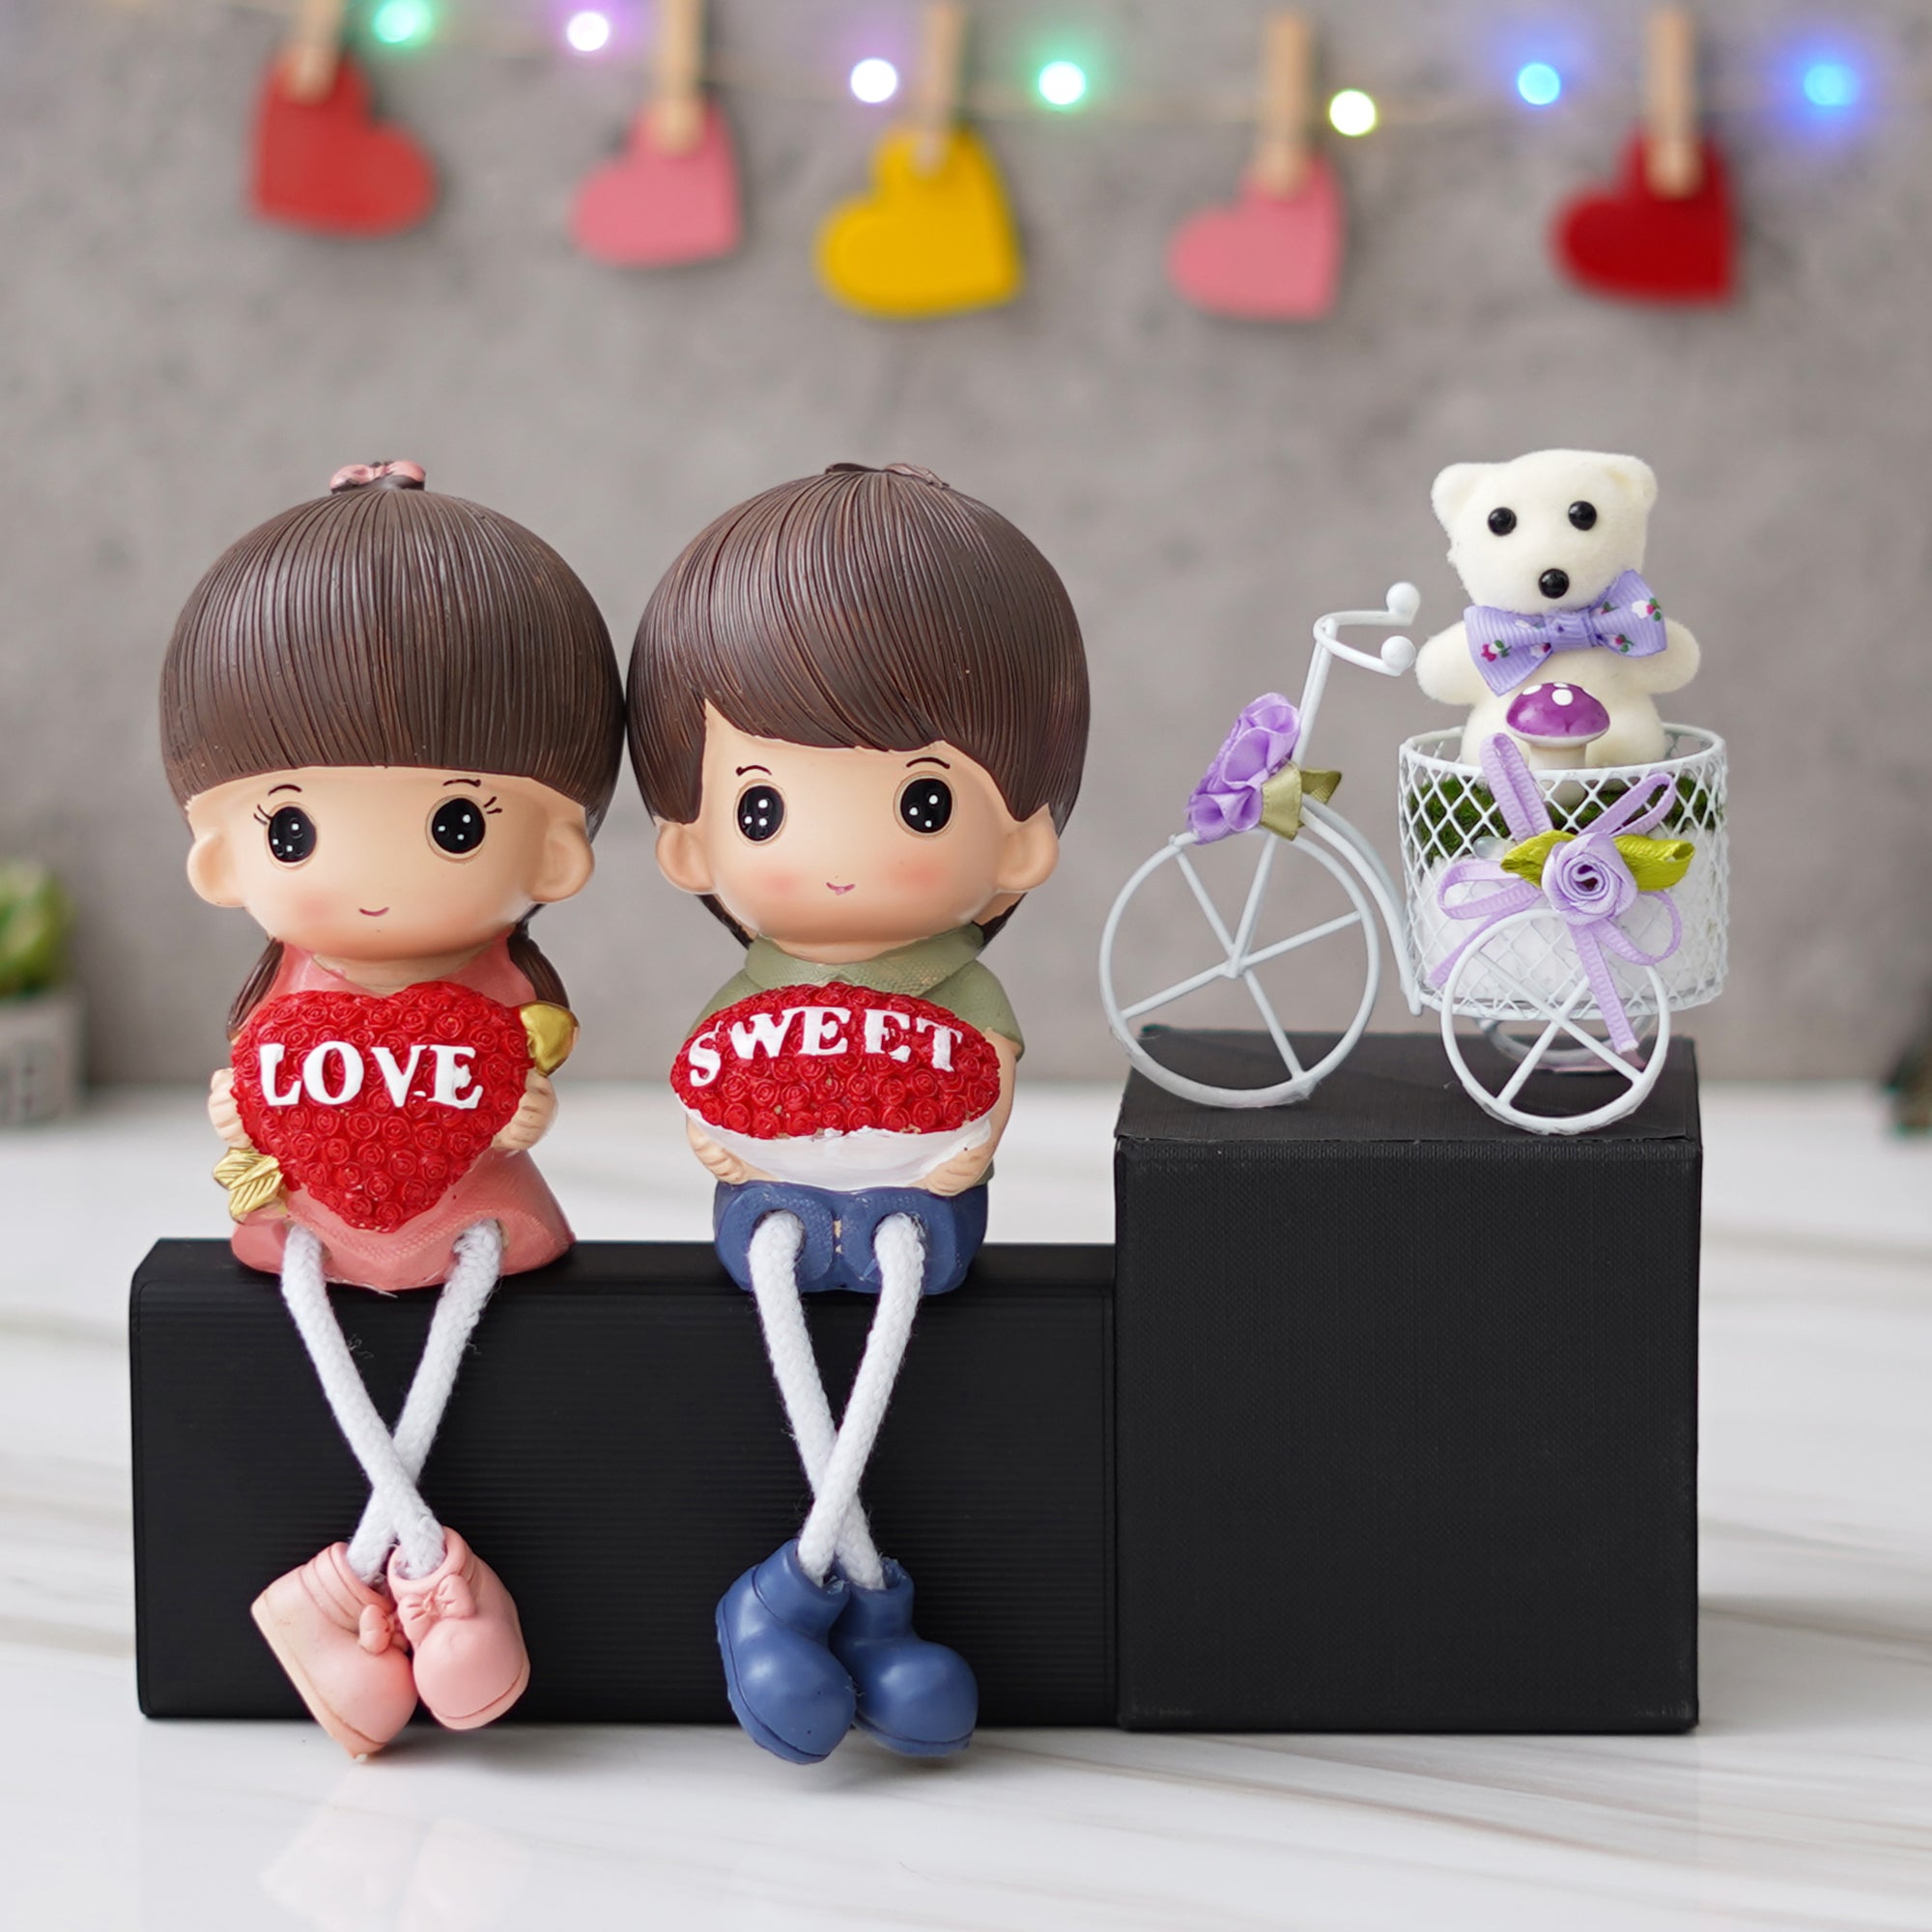 Valentine Combo of Colorful Sweet Love Girl & Boy Figurine, White Cycle with Teddy Bear and Rose Petals Gift Box